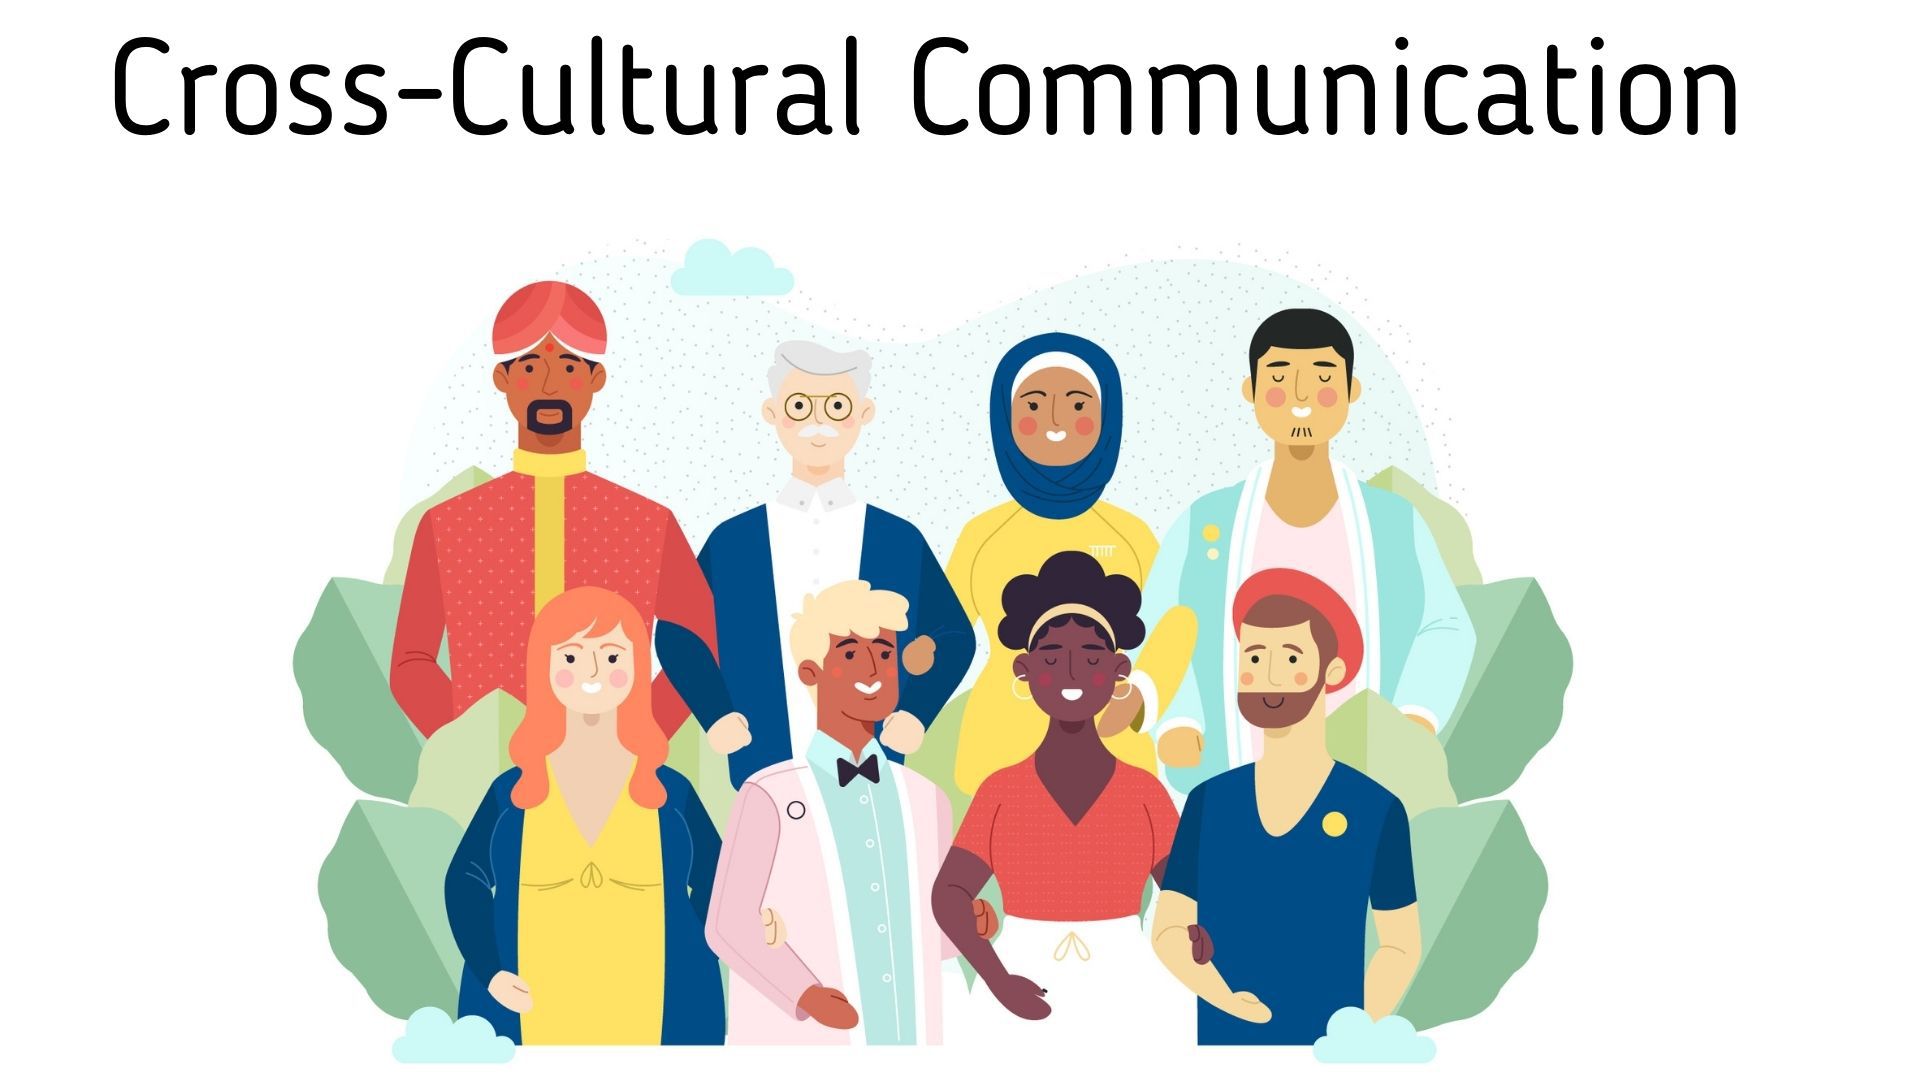 importance of cross cultural communication essay